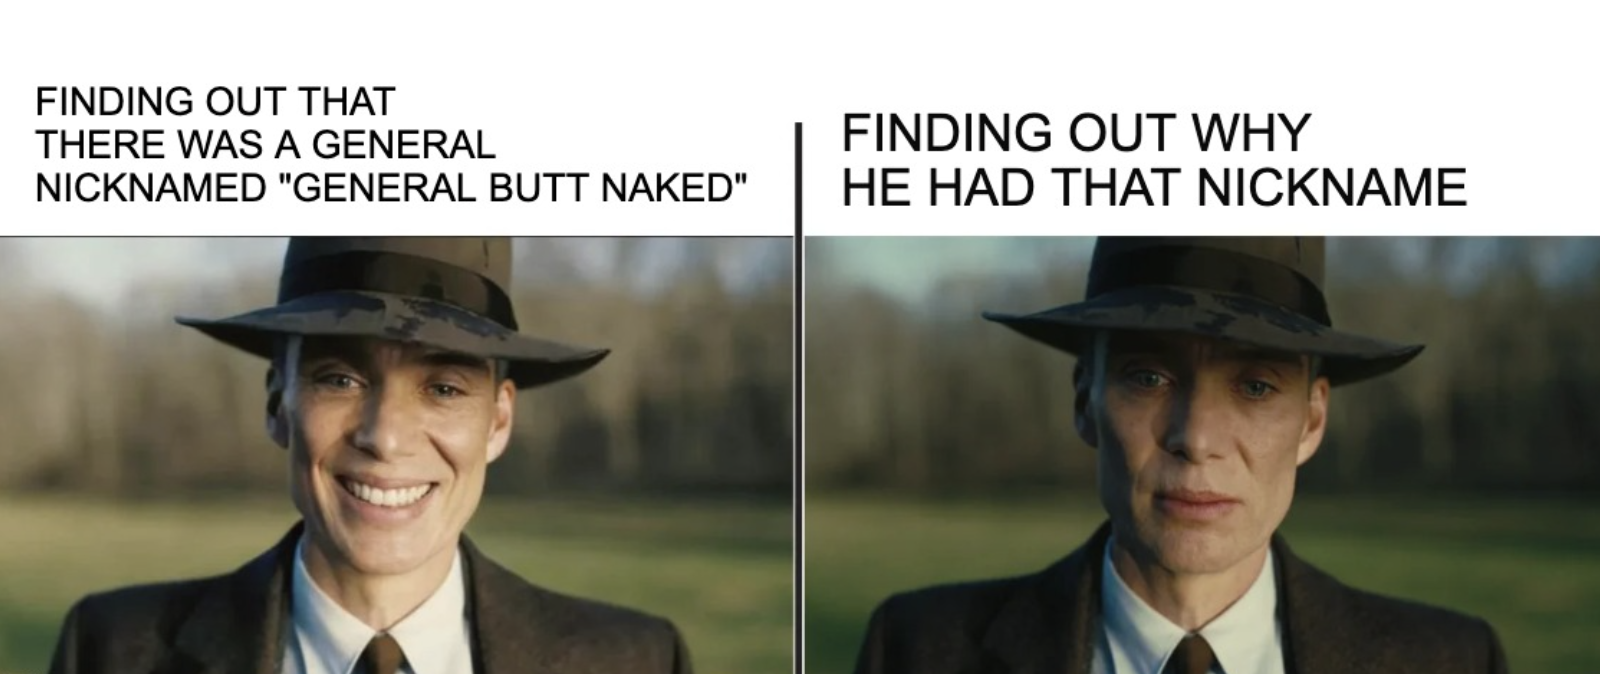 General buttnaked - the backstory is not so funny...